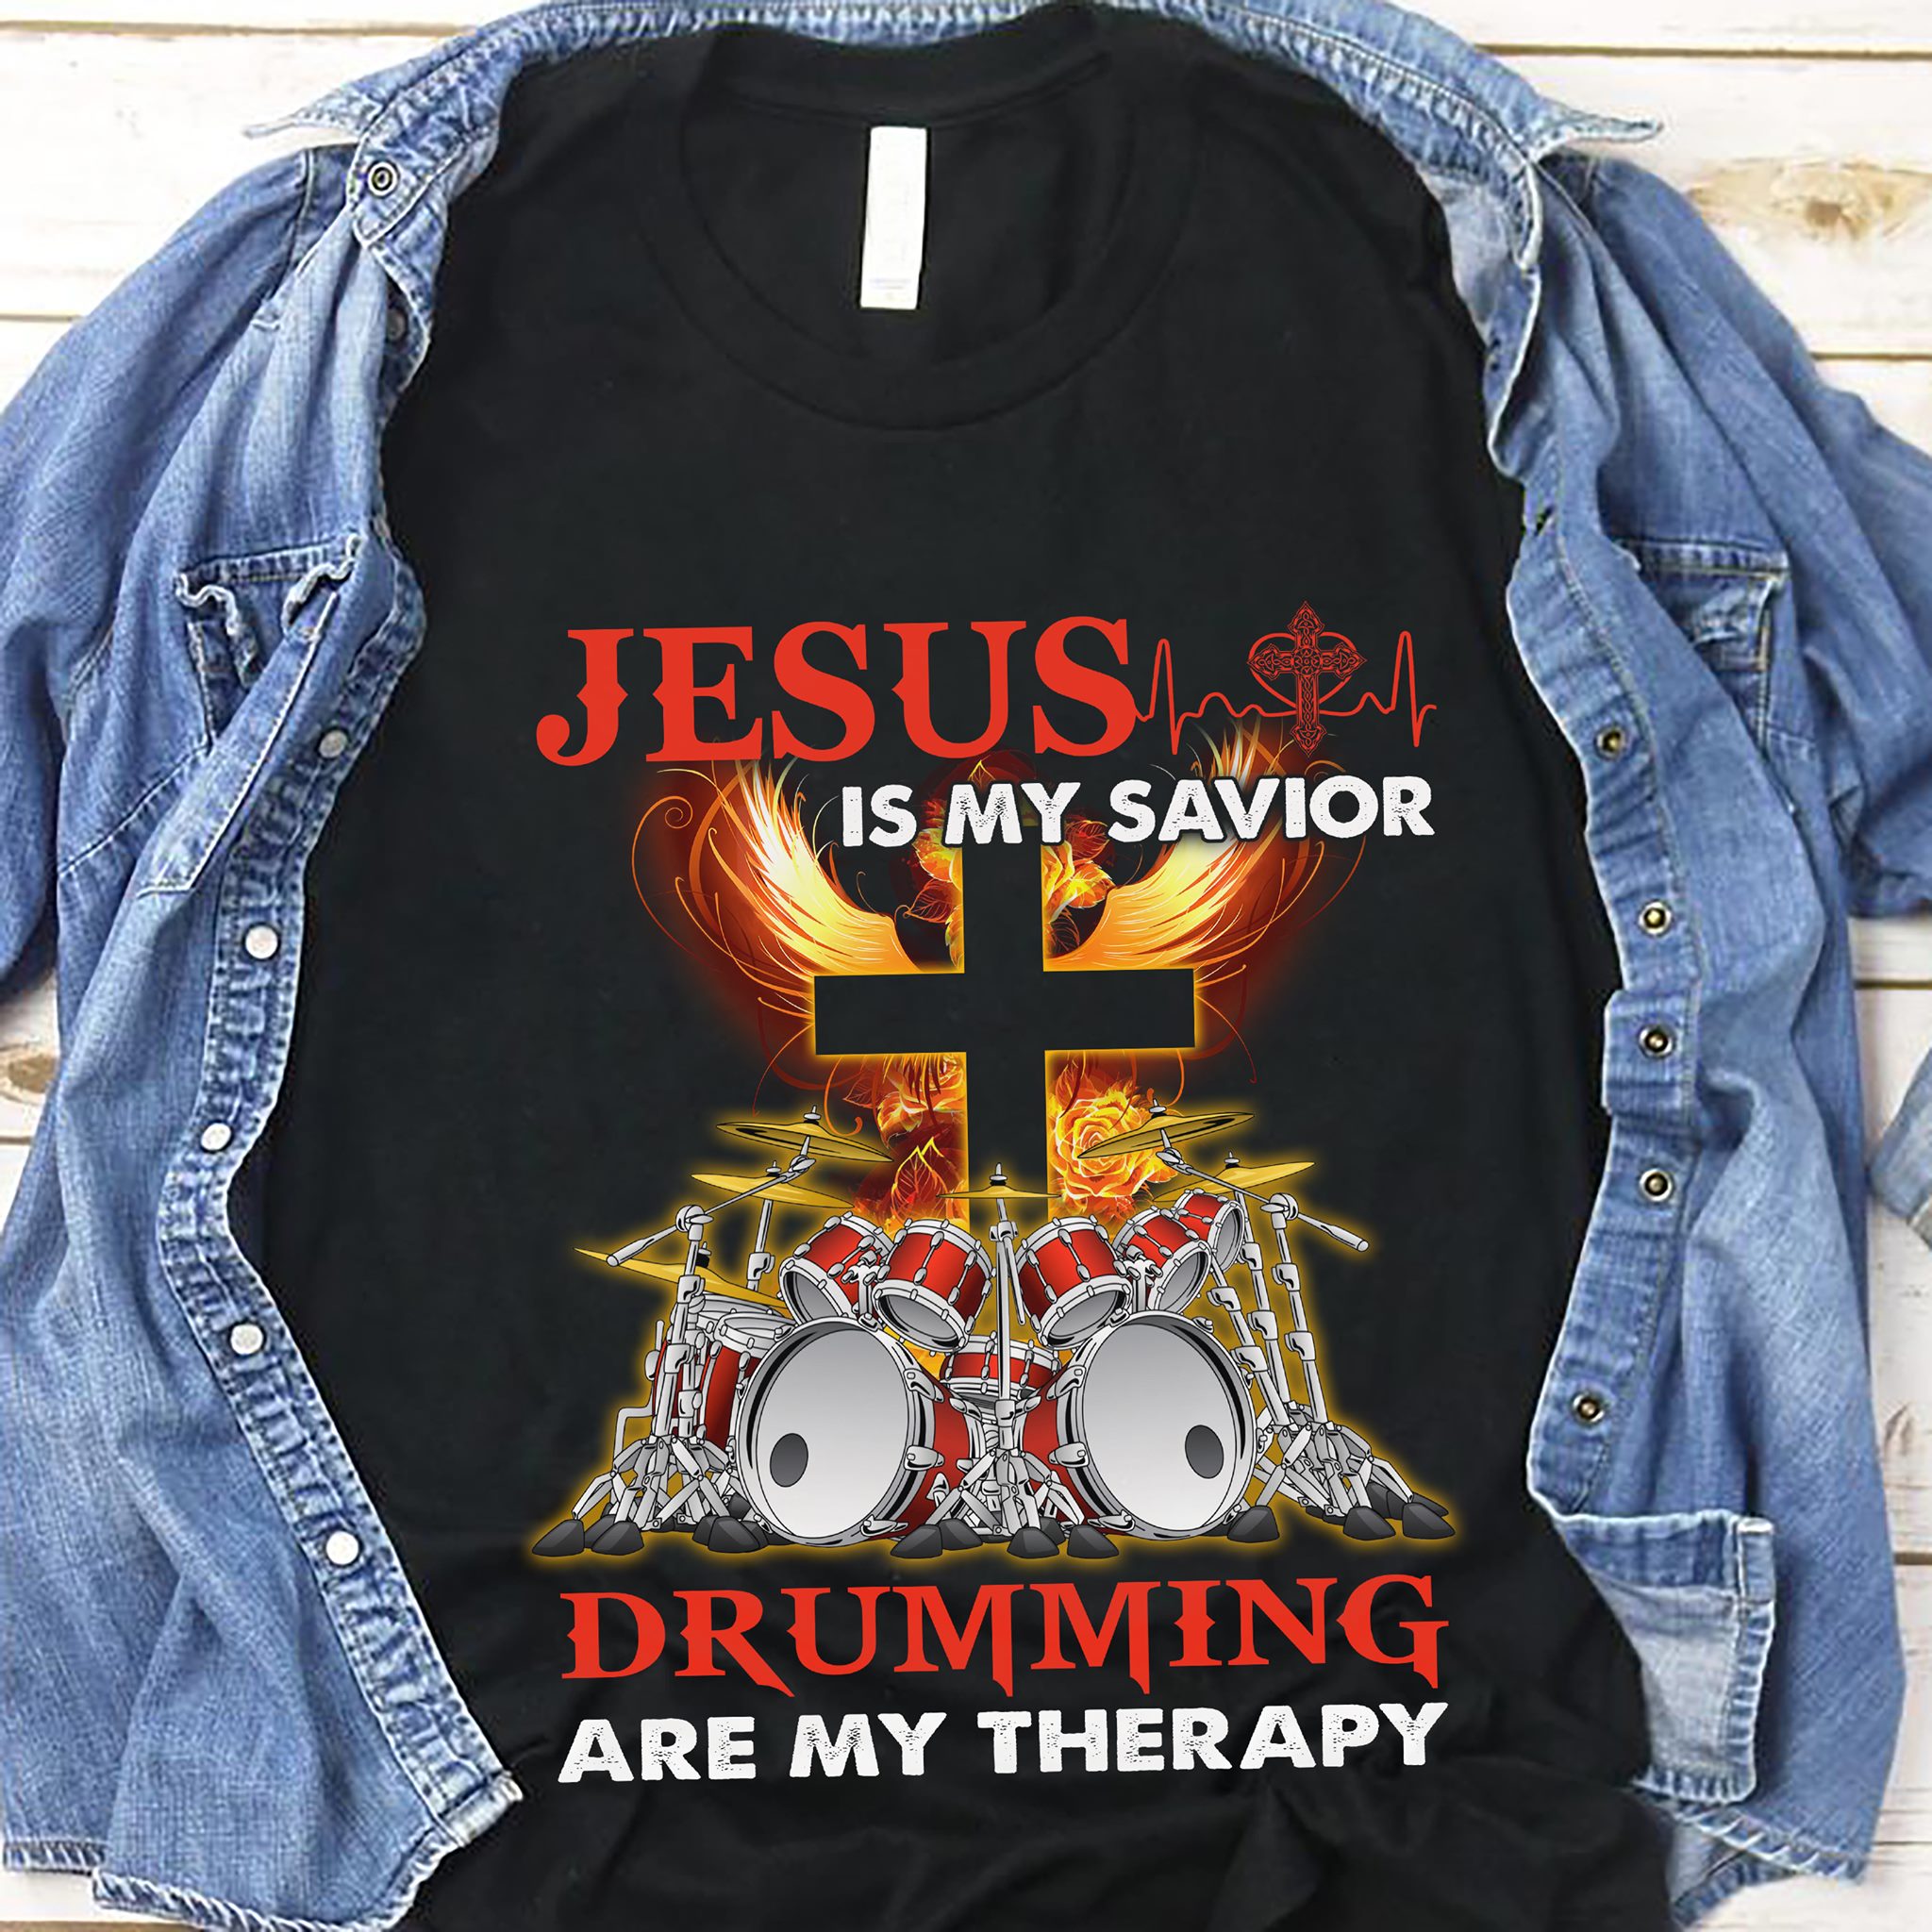 Jesus is my savior Drumming are my therapy